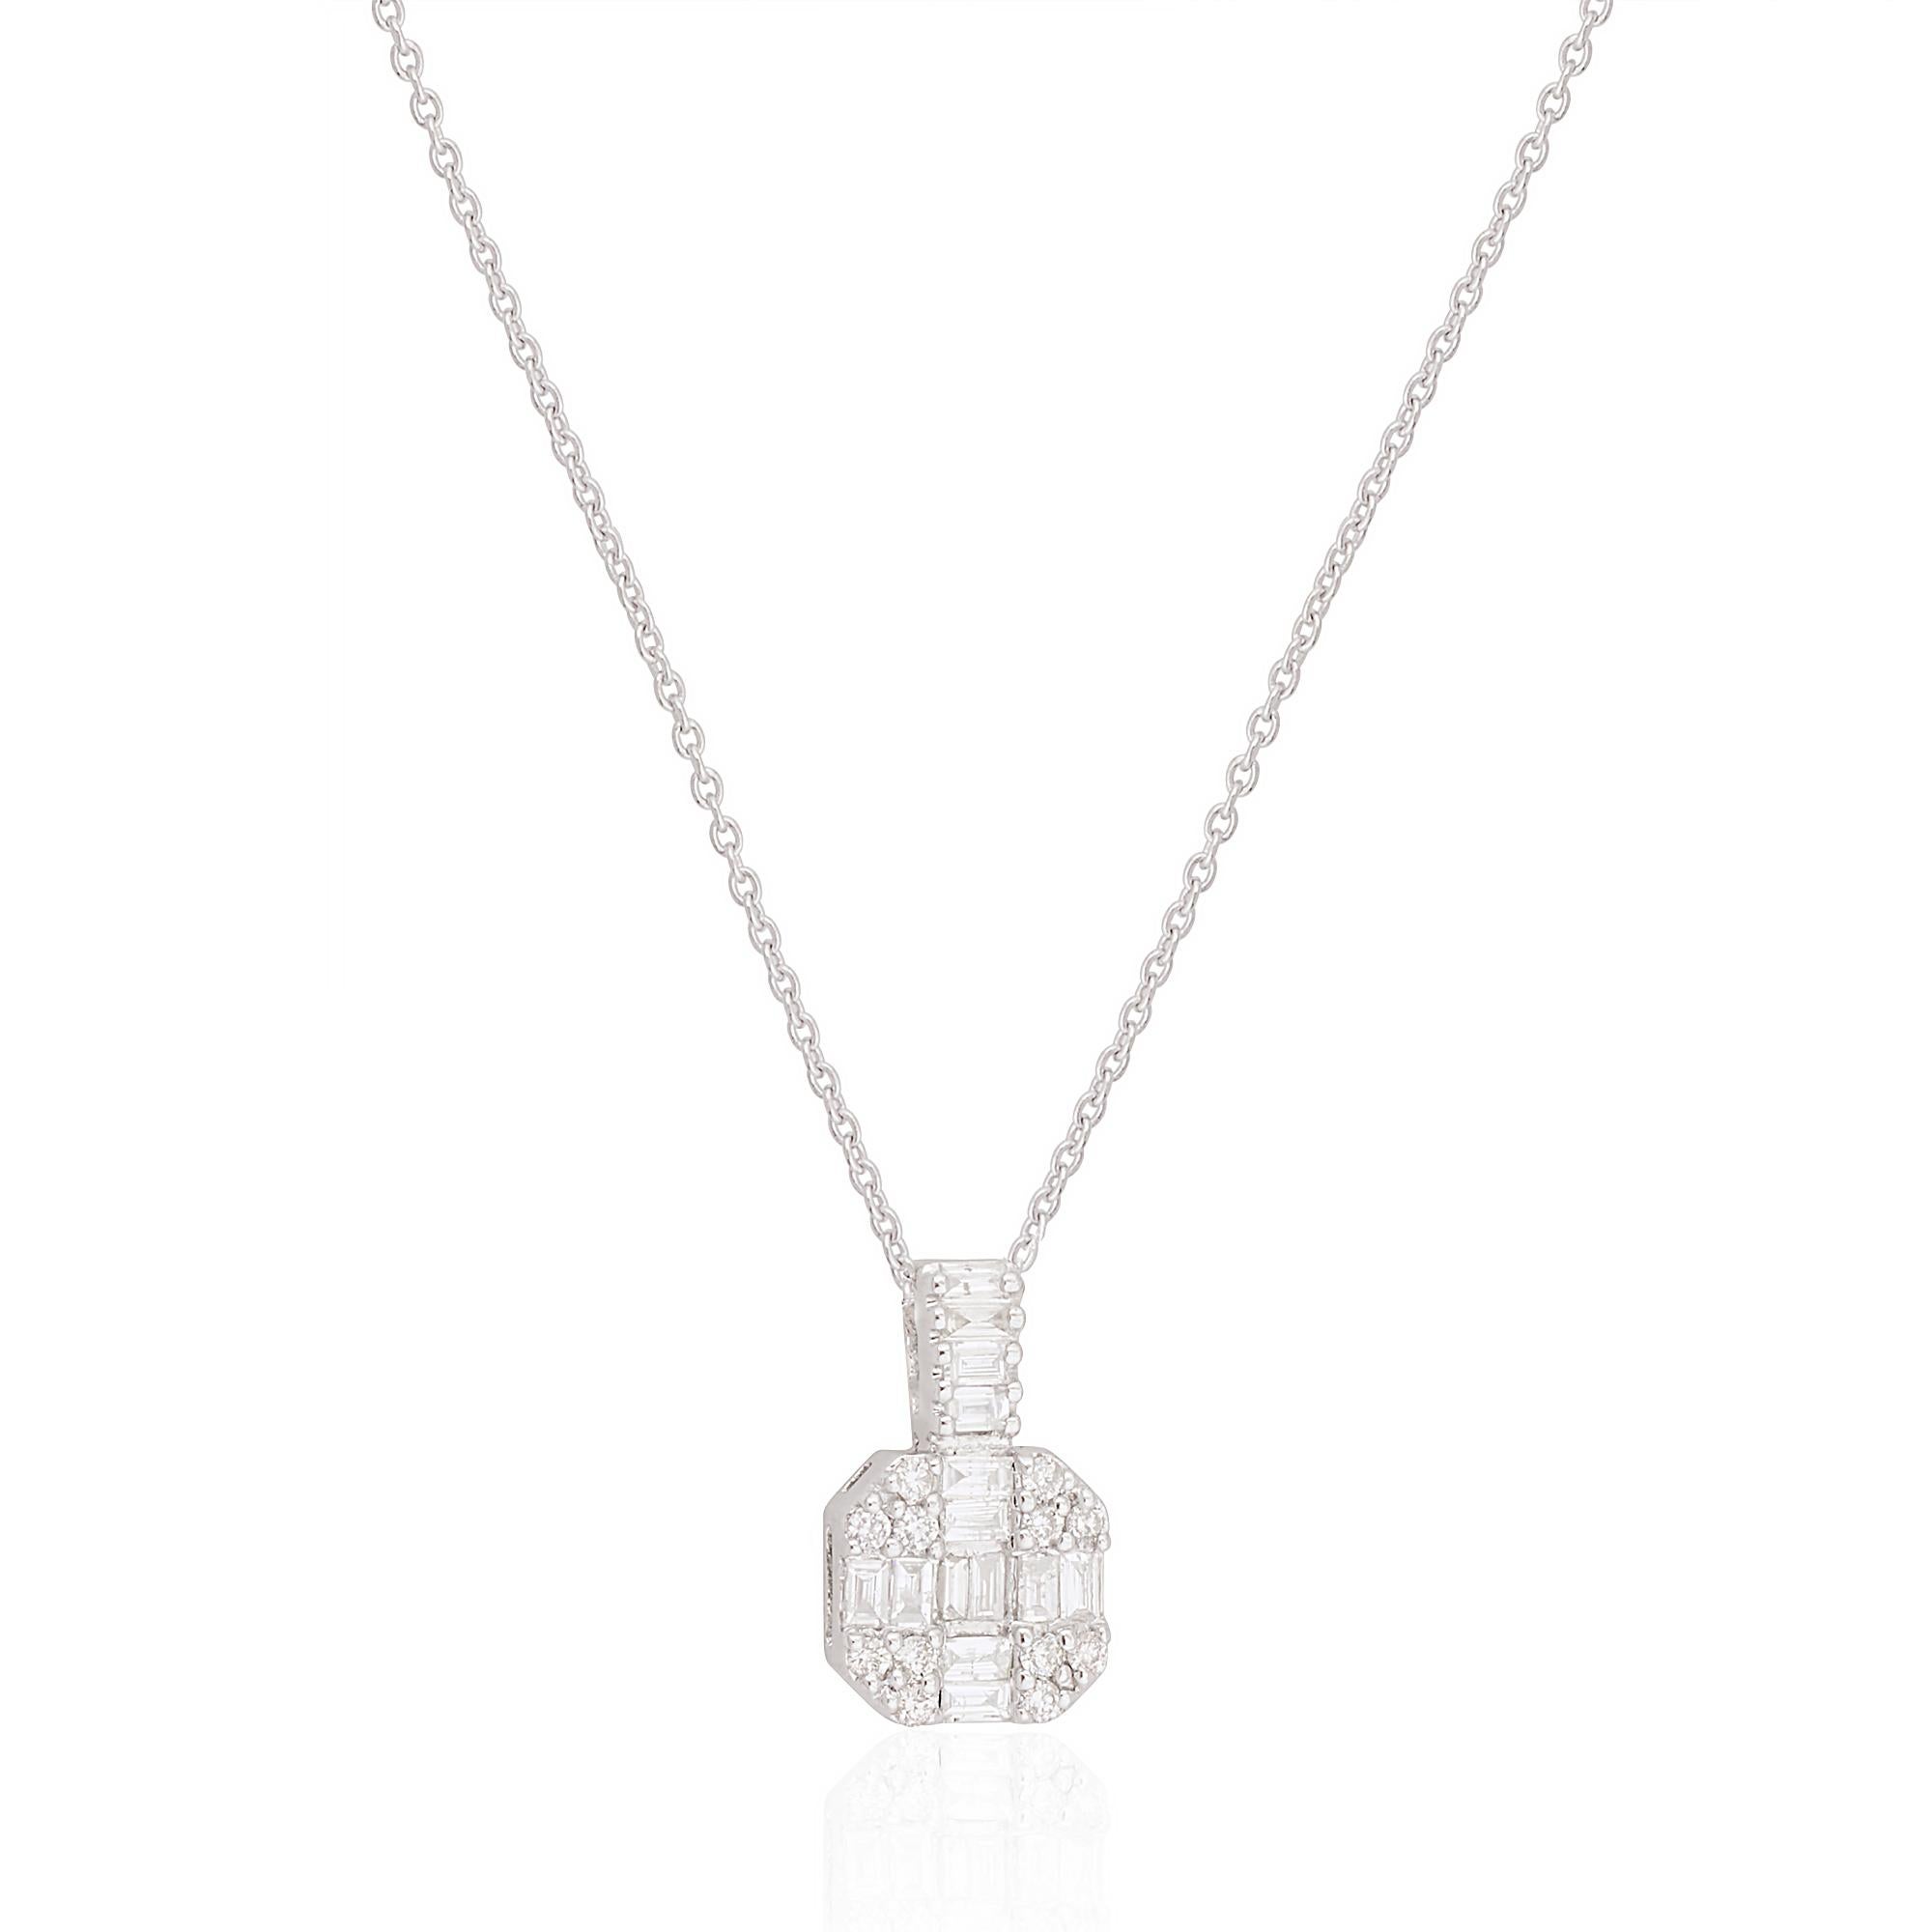 This pendant necklace is a perfect gift for yourself or a loved one, symbolizing elegance and refined taste. It is a timeless piece that can be treasured for a lifetime, representing both style and sentiment. With its delicate design and brilliant